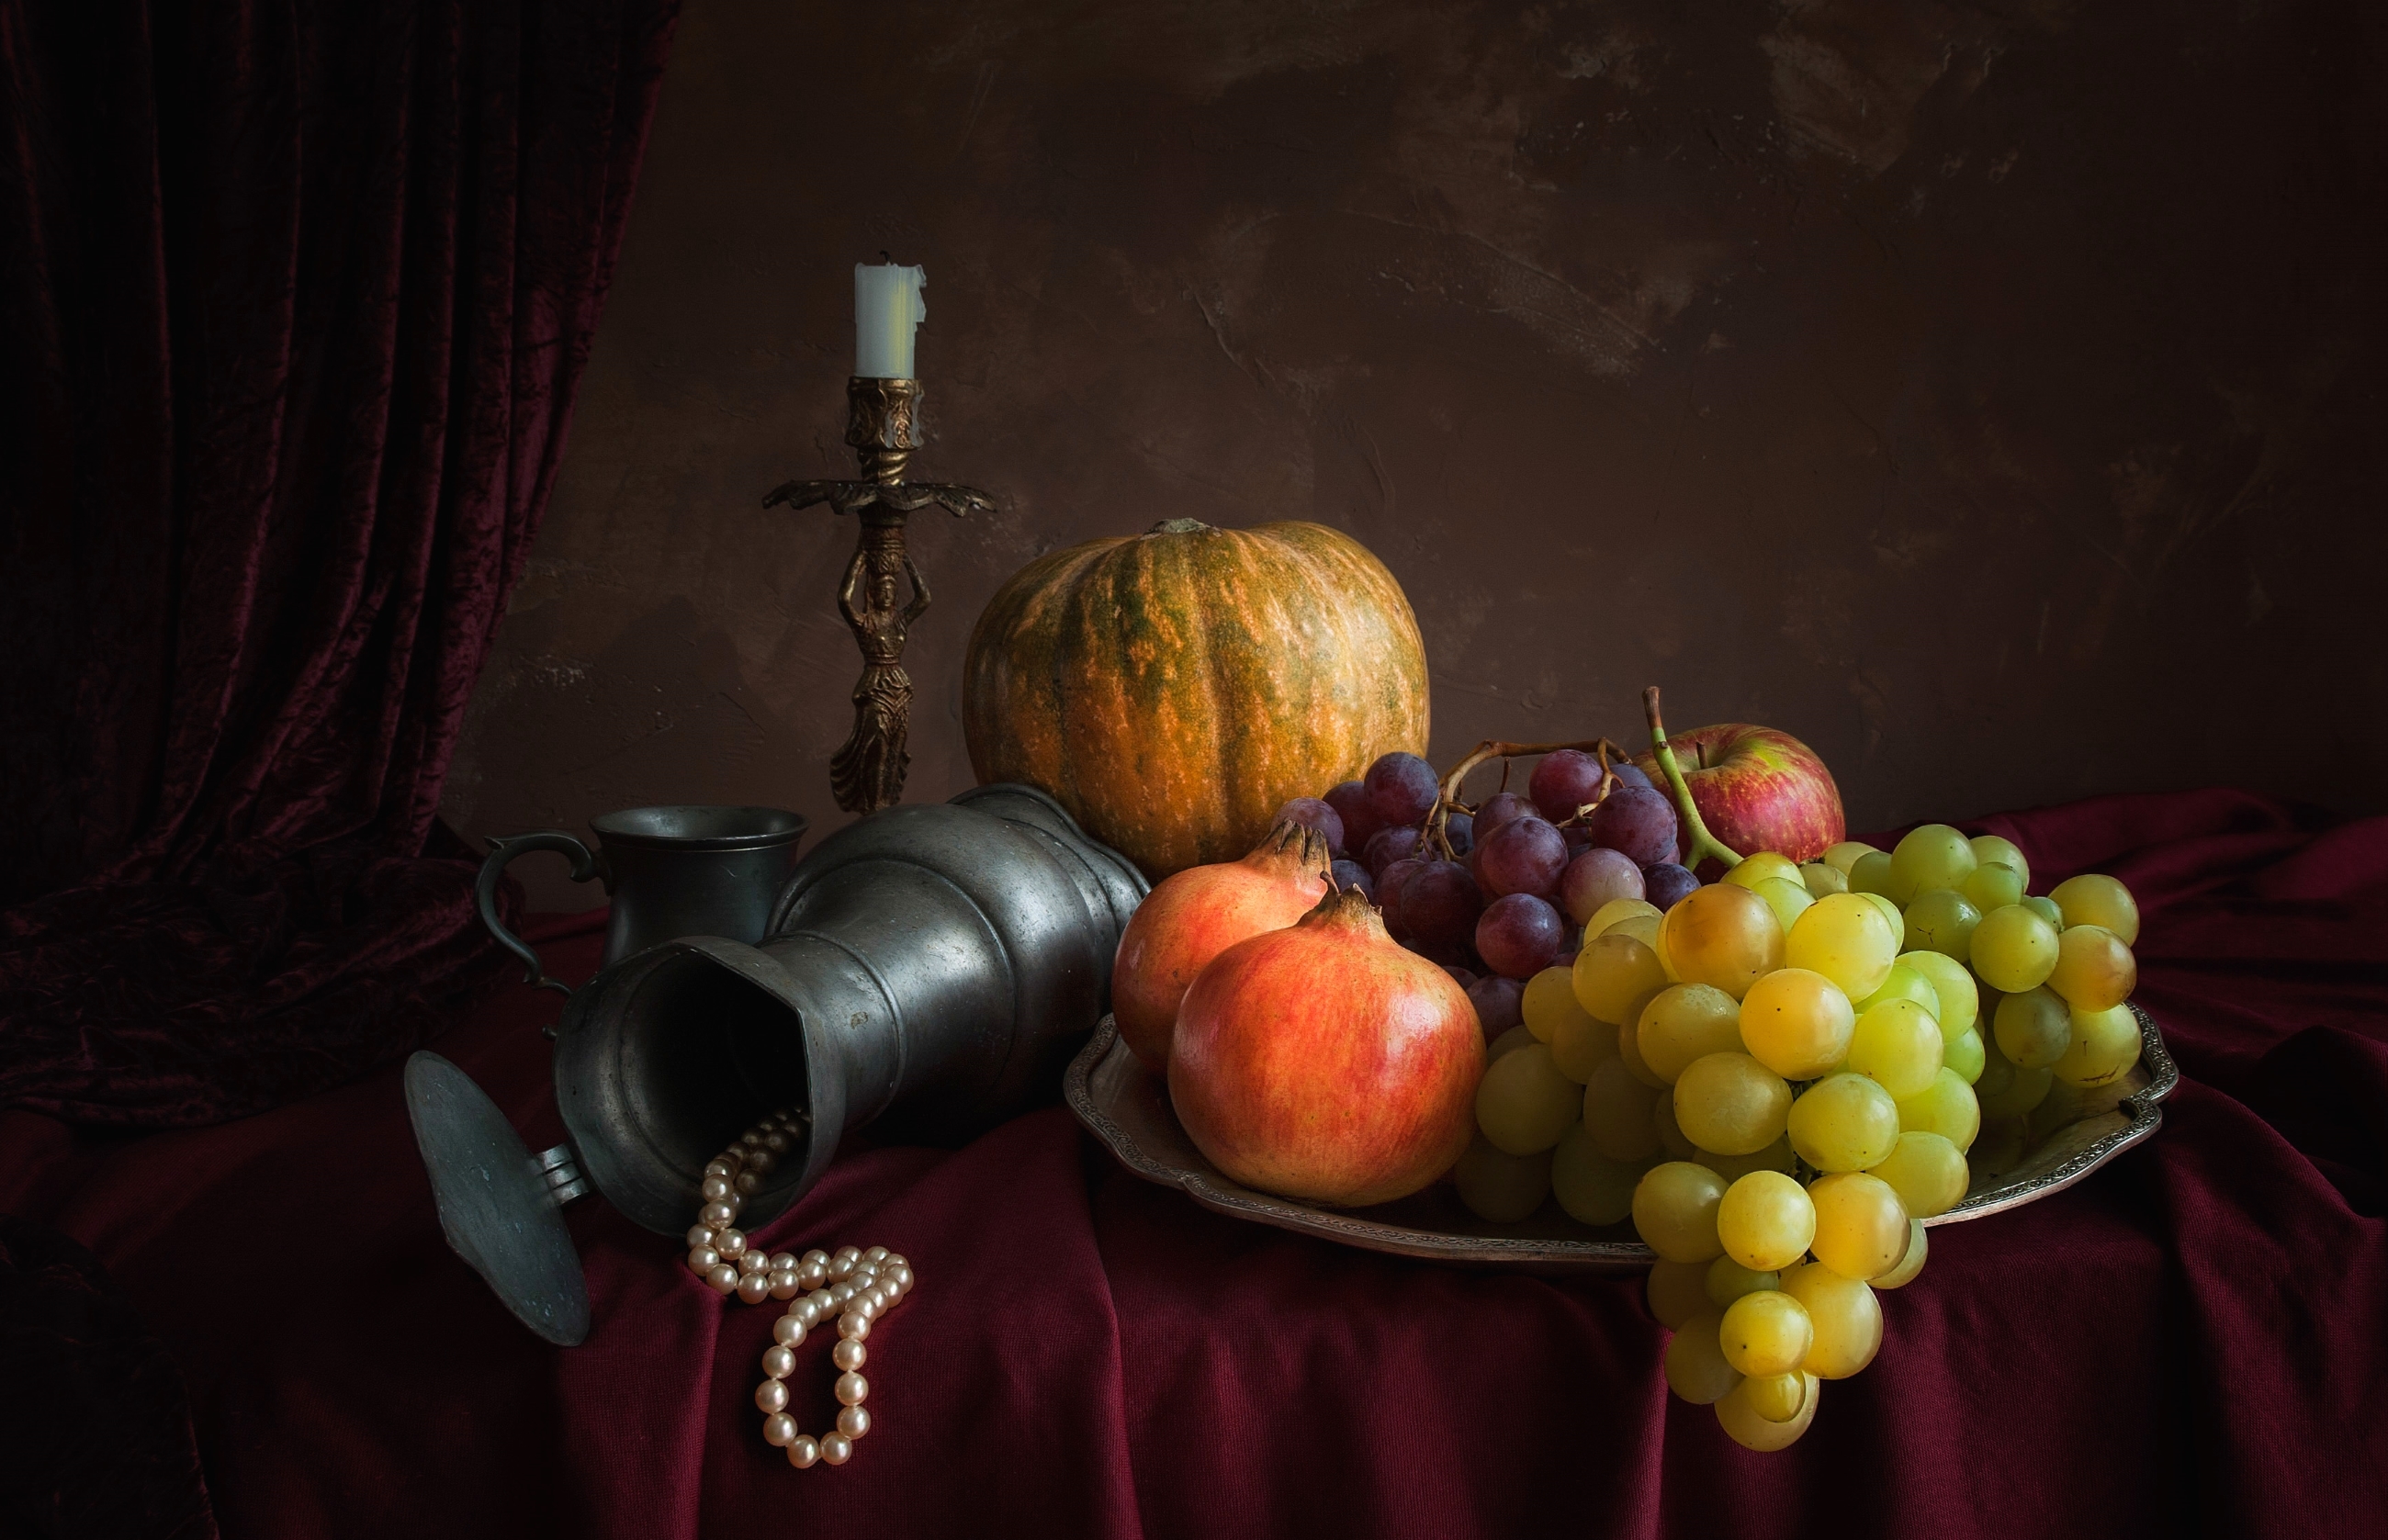 Candle Cup Fruit Gourd Grapes Pitcher Still Life 2600x1677